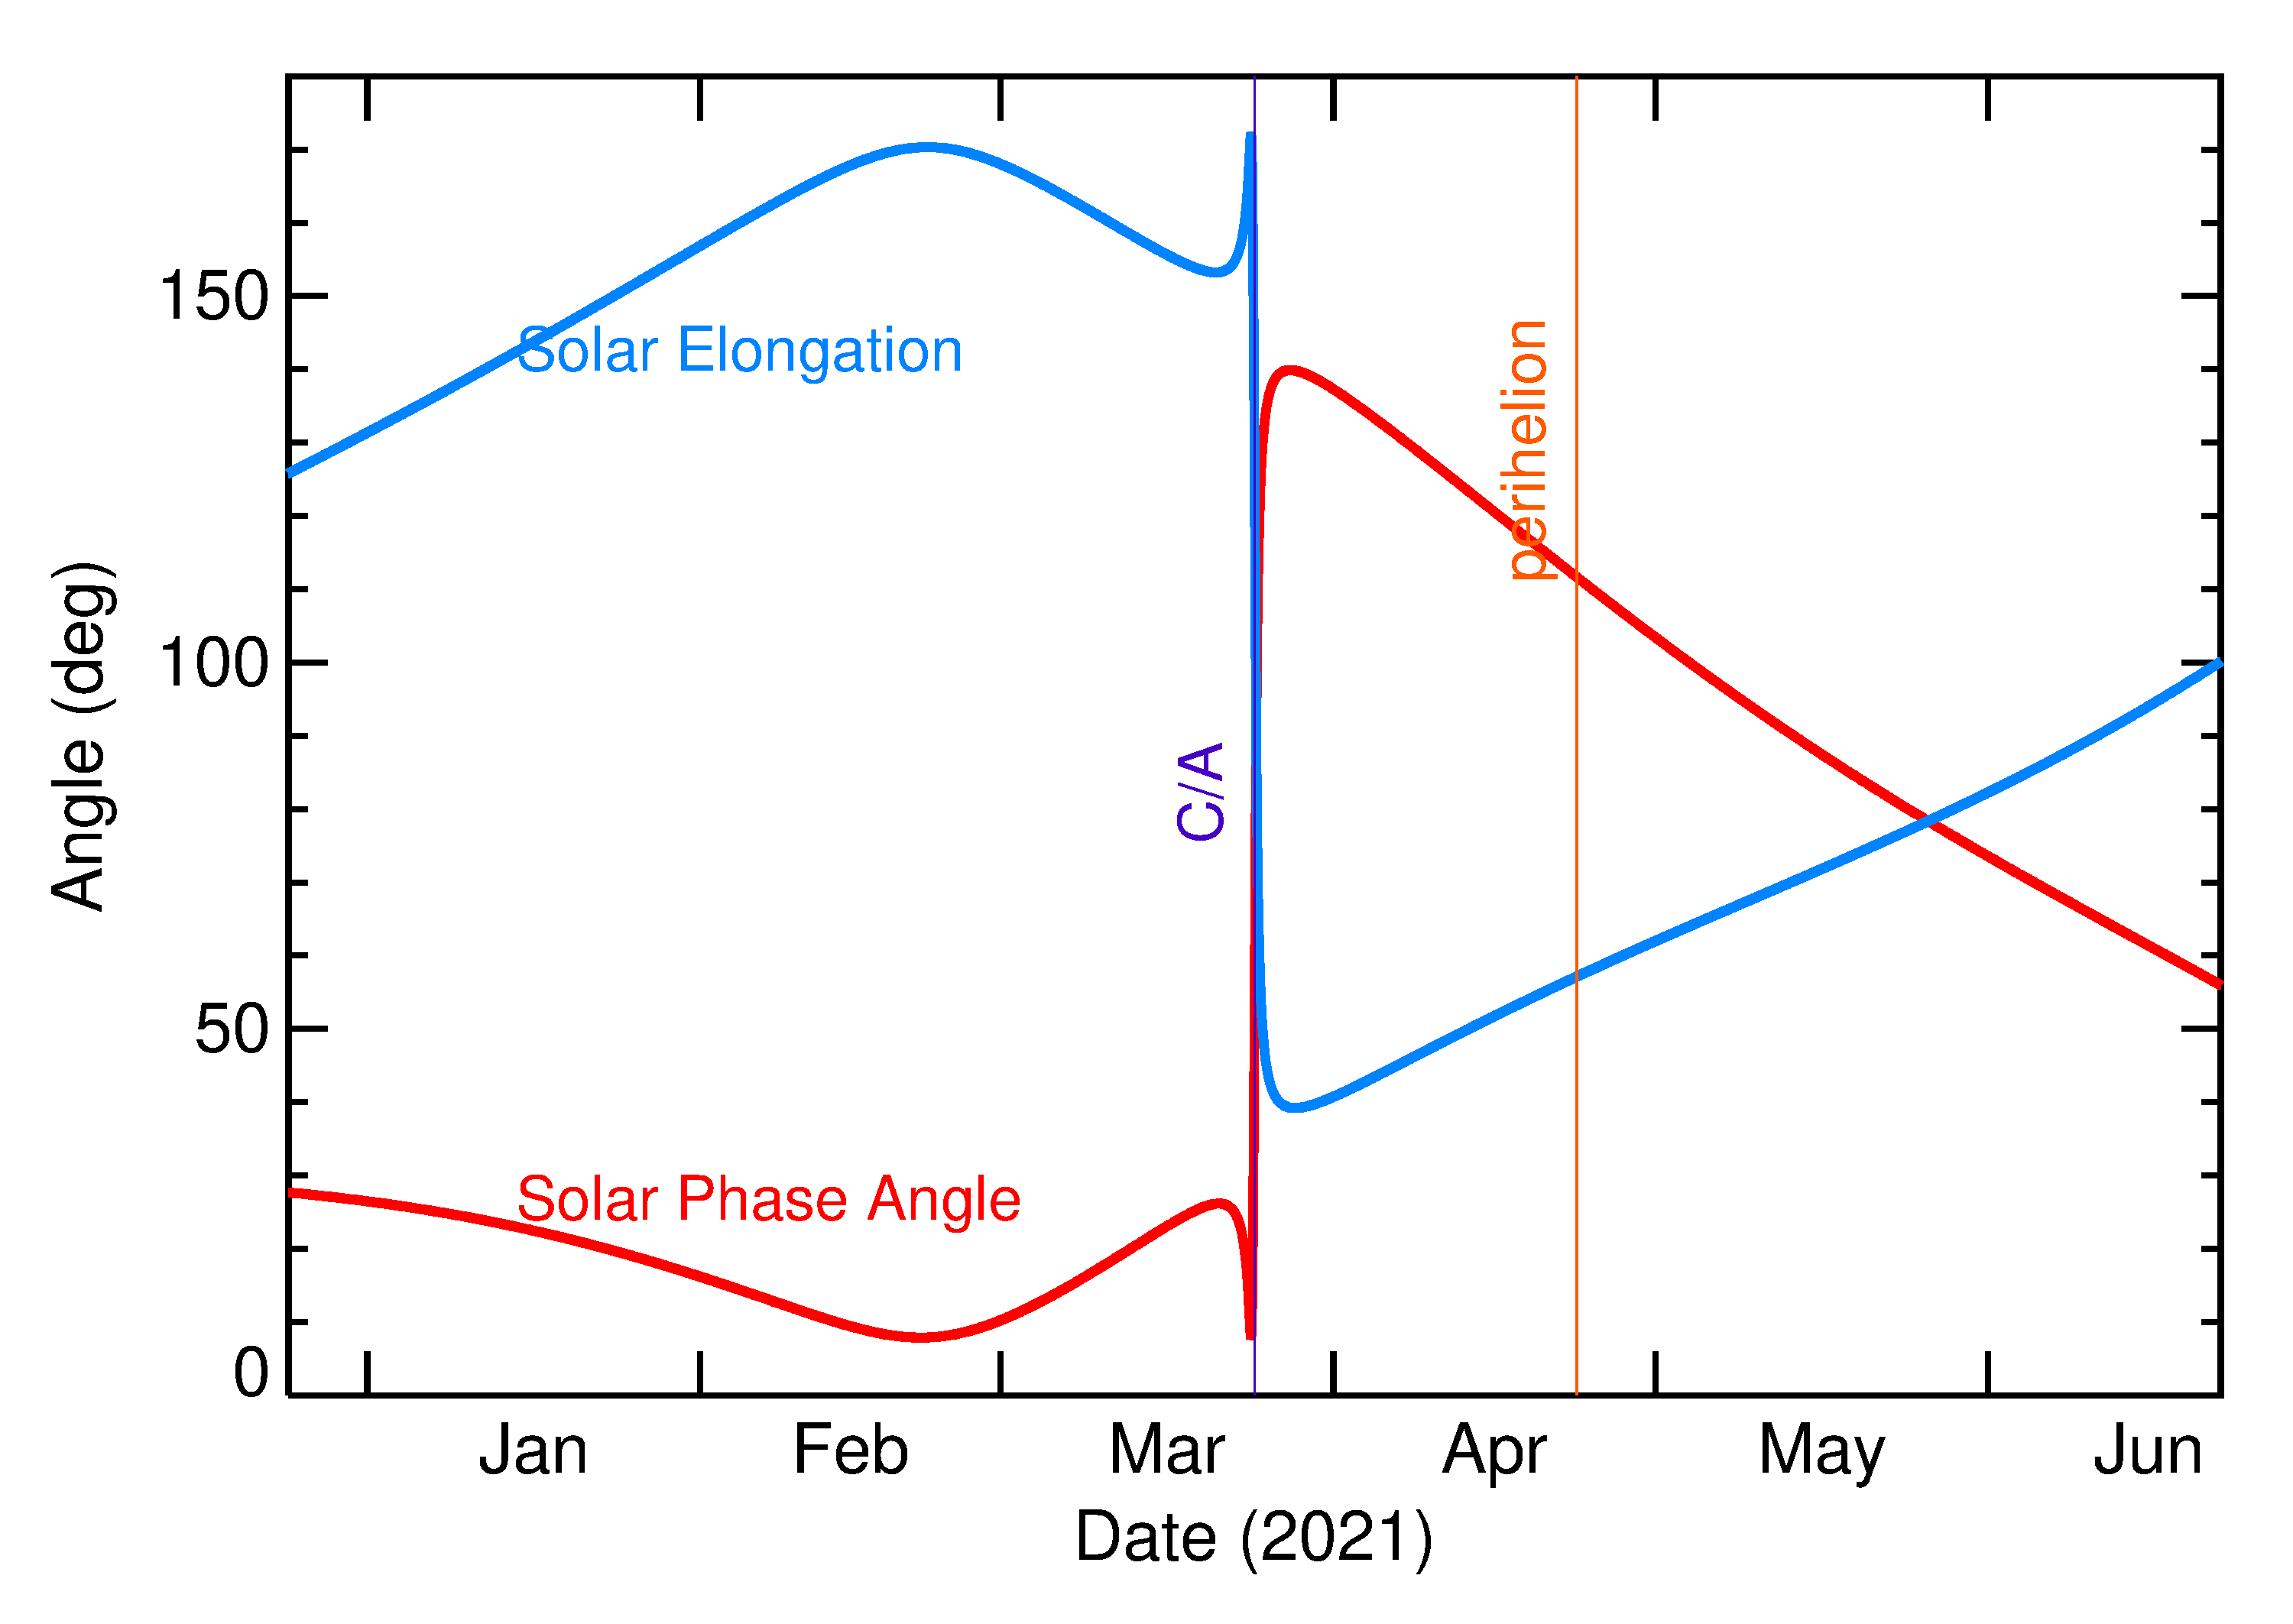 Solar Elongation and Solar Phase Angle of 2021 FH in the months around closest approach